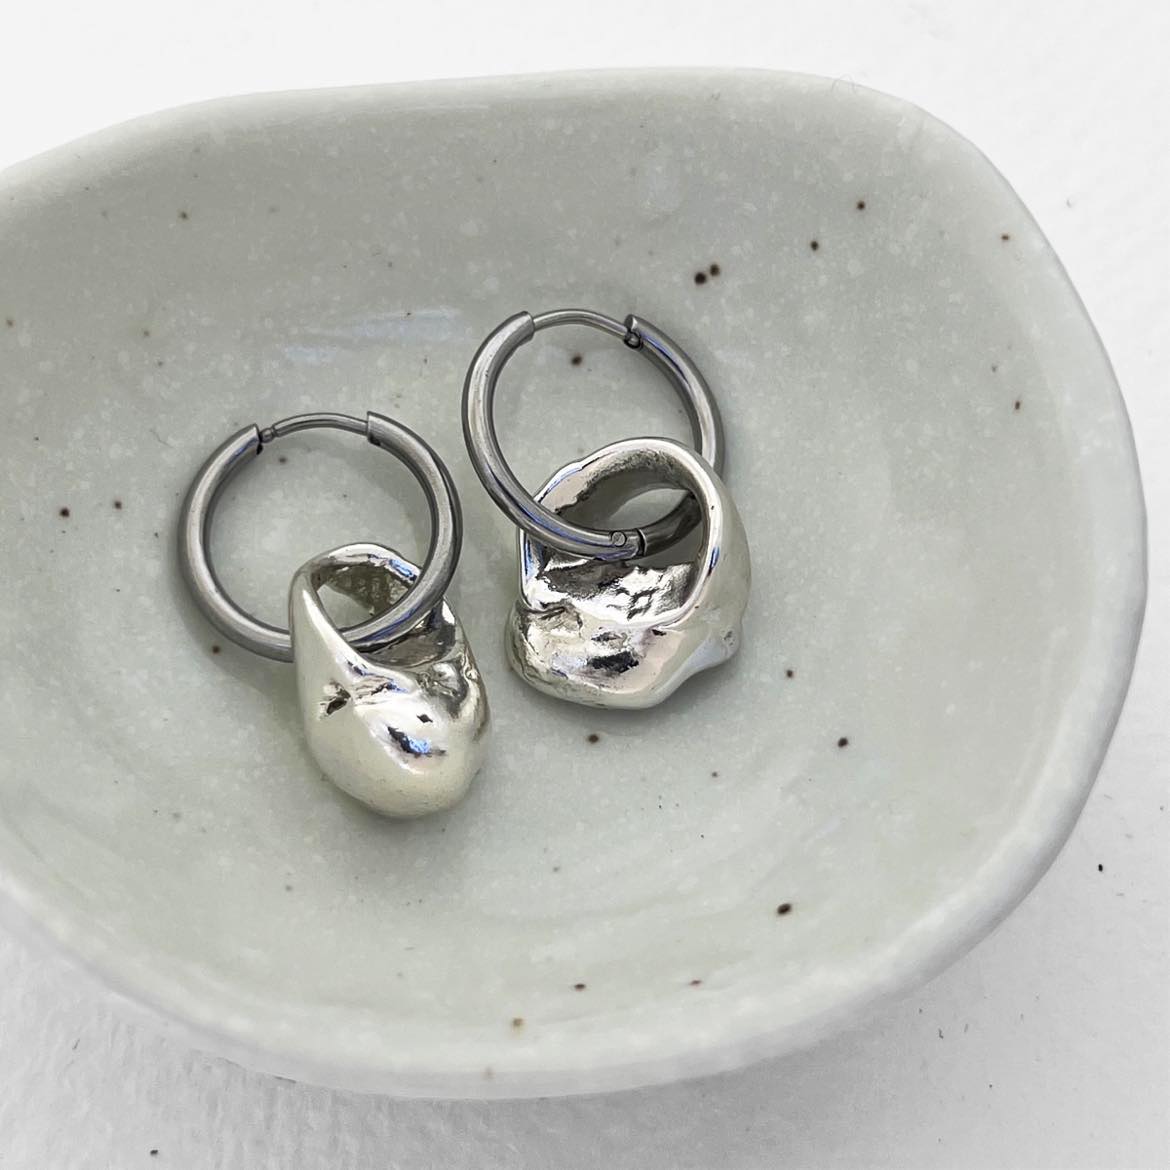 Worn out Sea Snail Shell (Pupu Nerida) Round Hoop Earrings